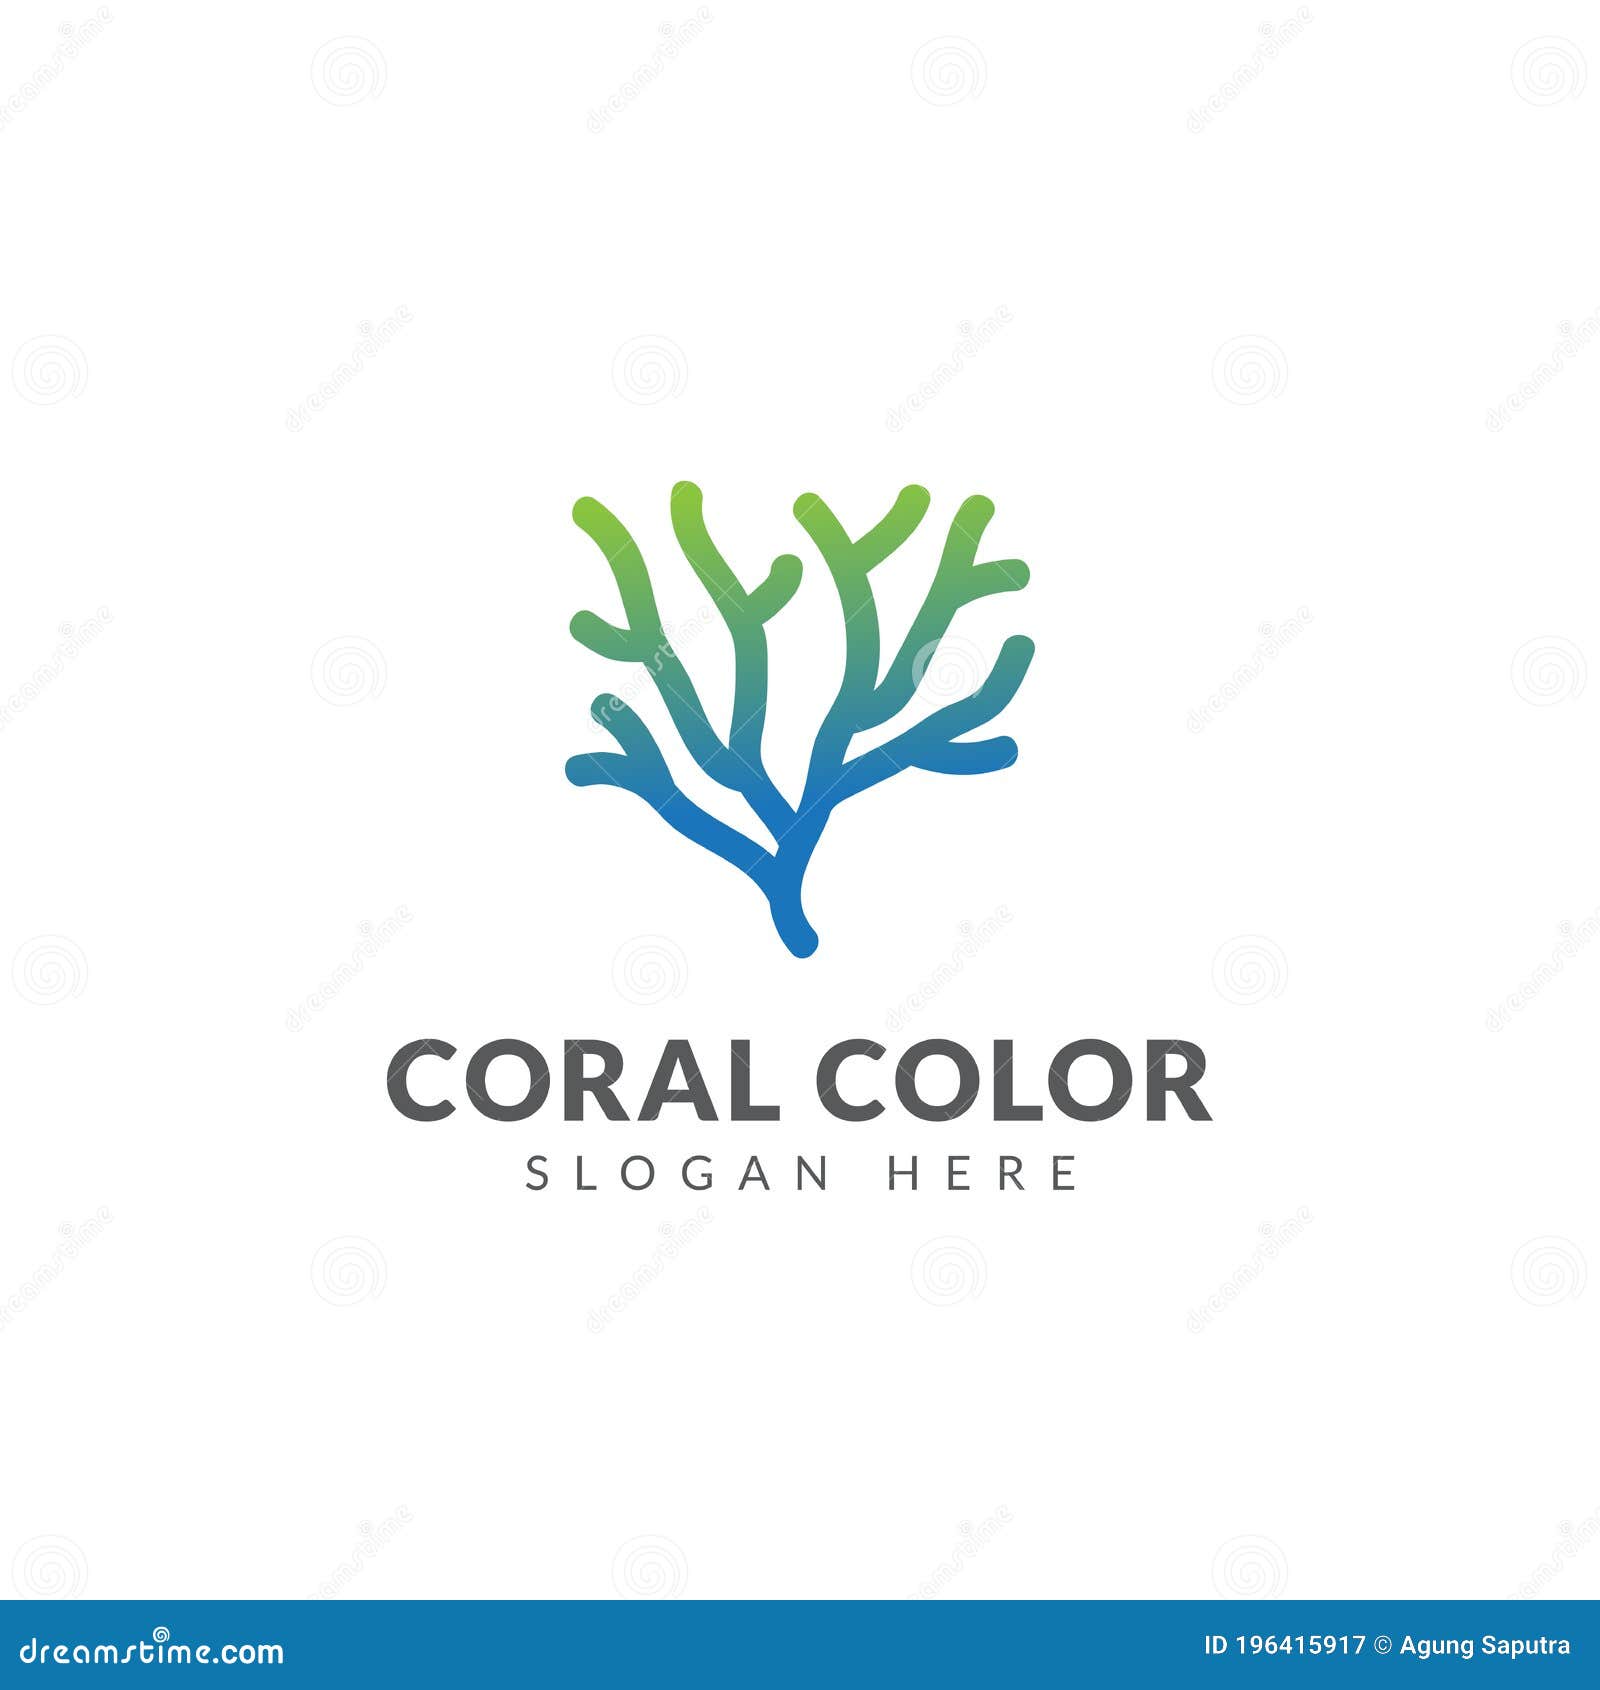 Coral Care - Logo and Graphic Designs 👧 by Stacey Troutman